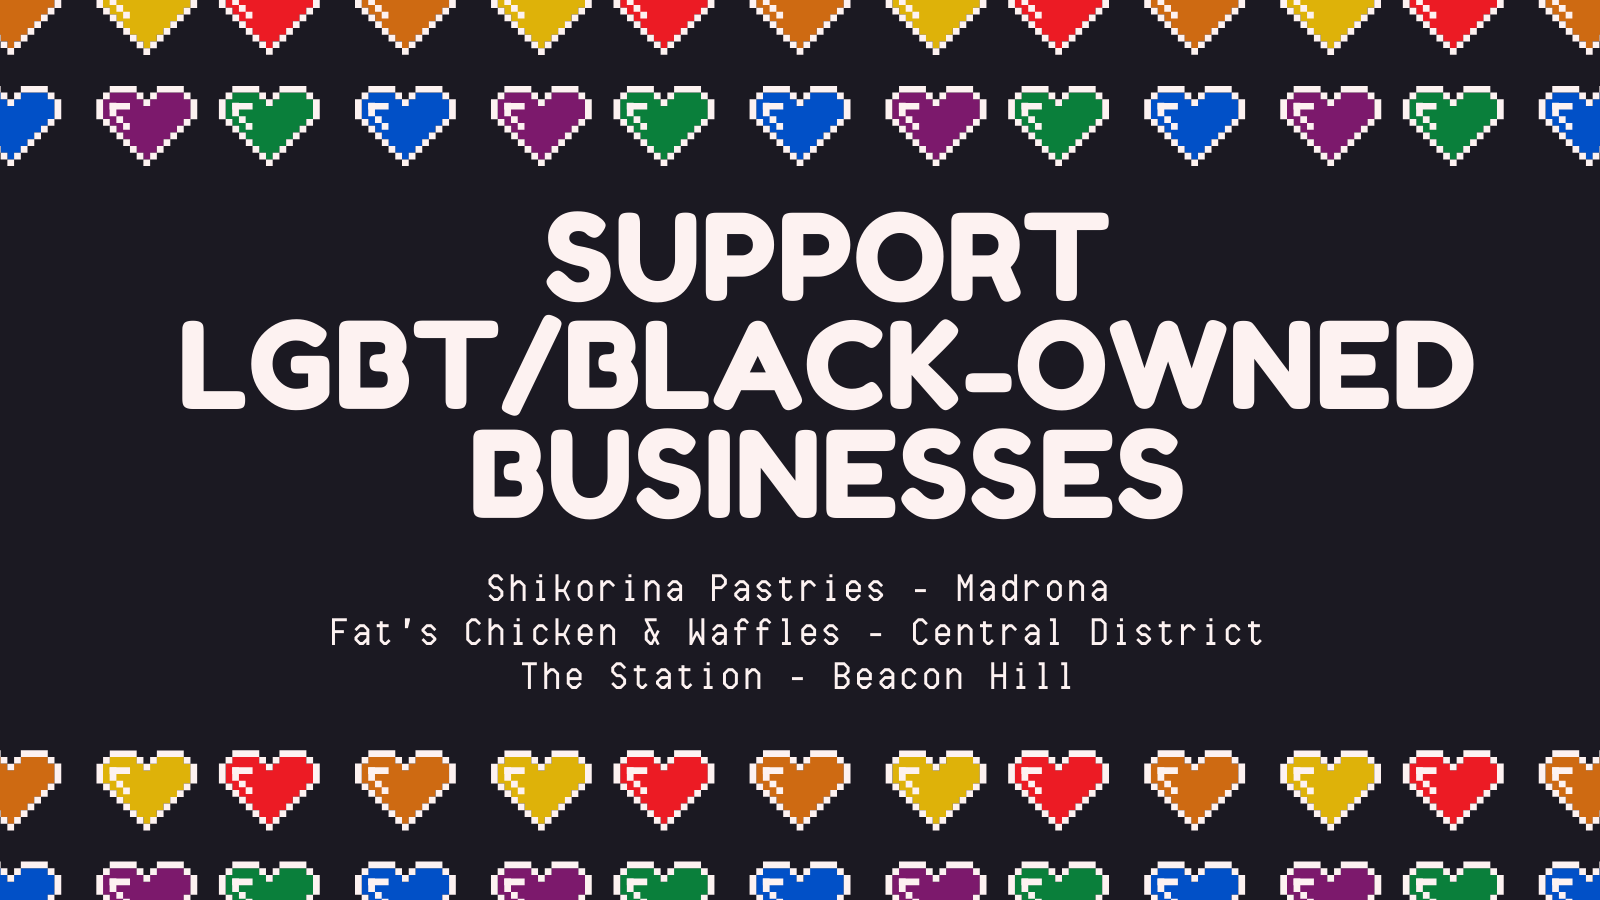 Graphic with rainbow hearts saying "Support LGBT/Black-owned businesses"